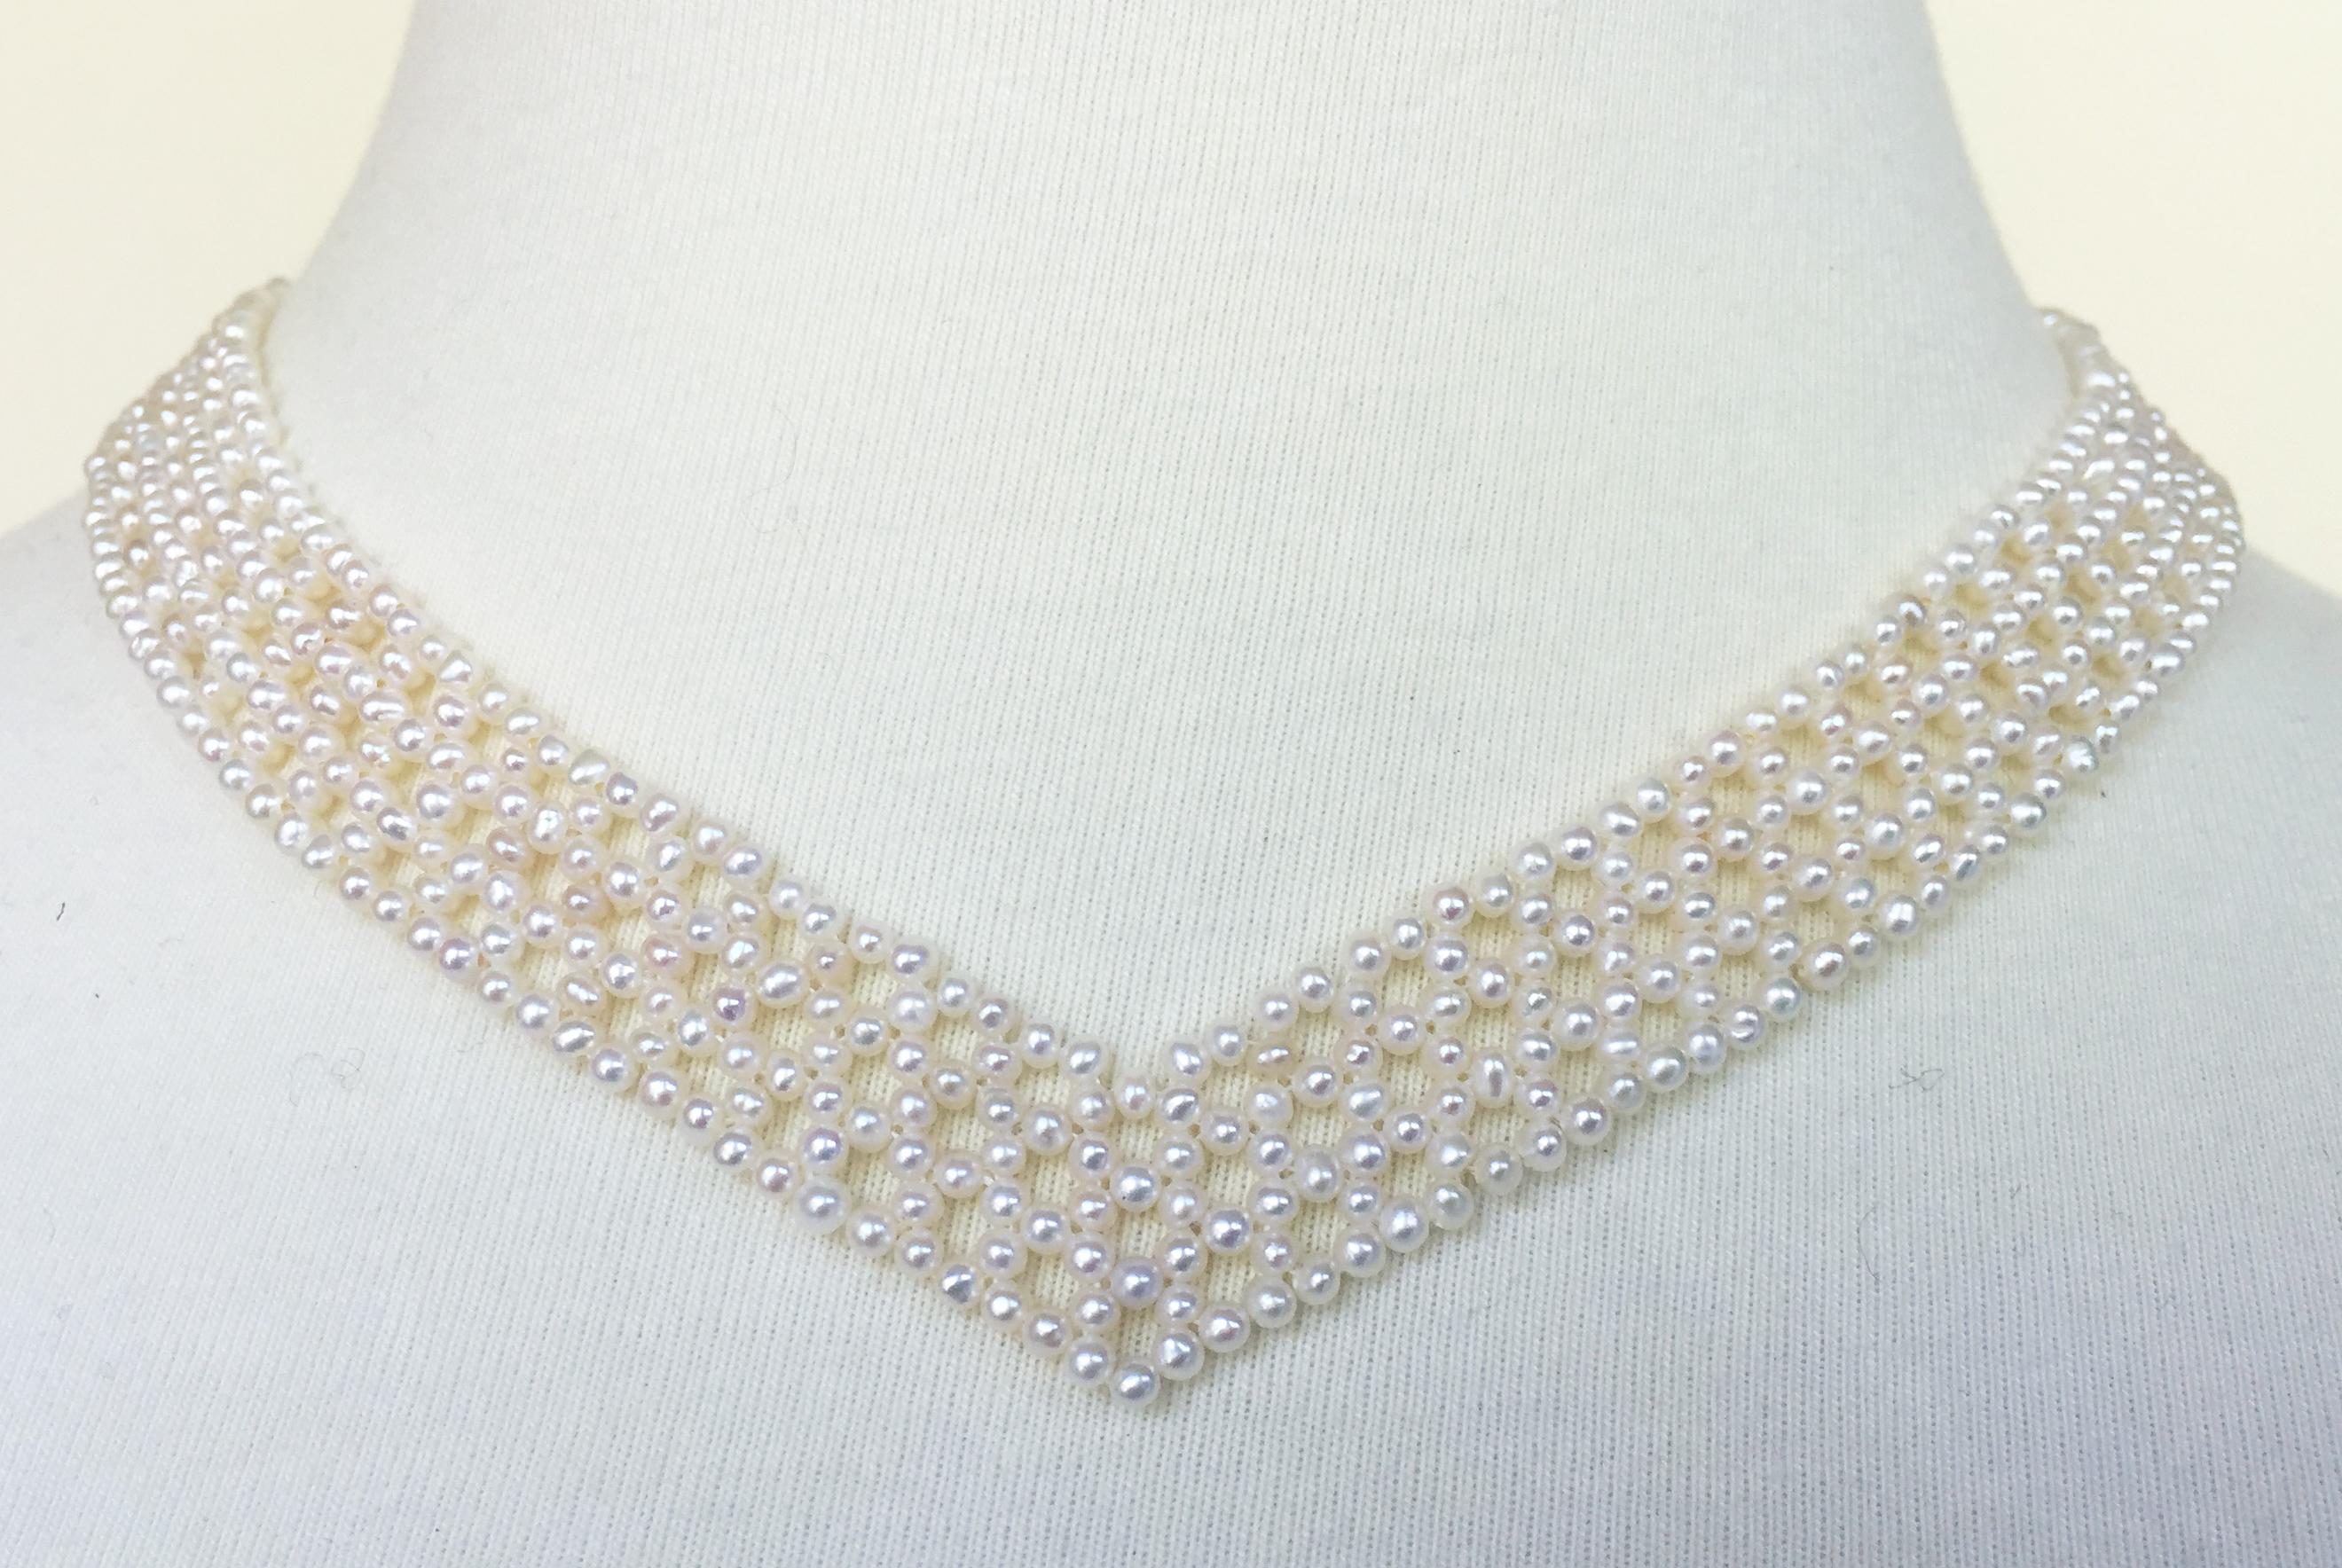 Bead Marina J Woven 'V' Shaped Pearl Necklace with Vintage Brooch